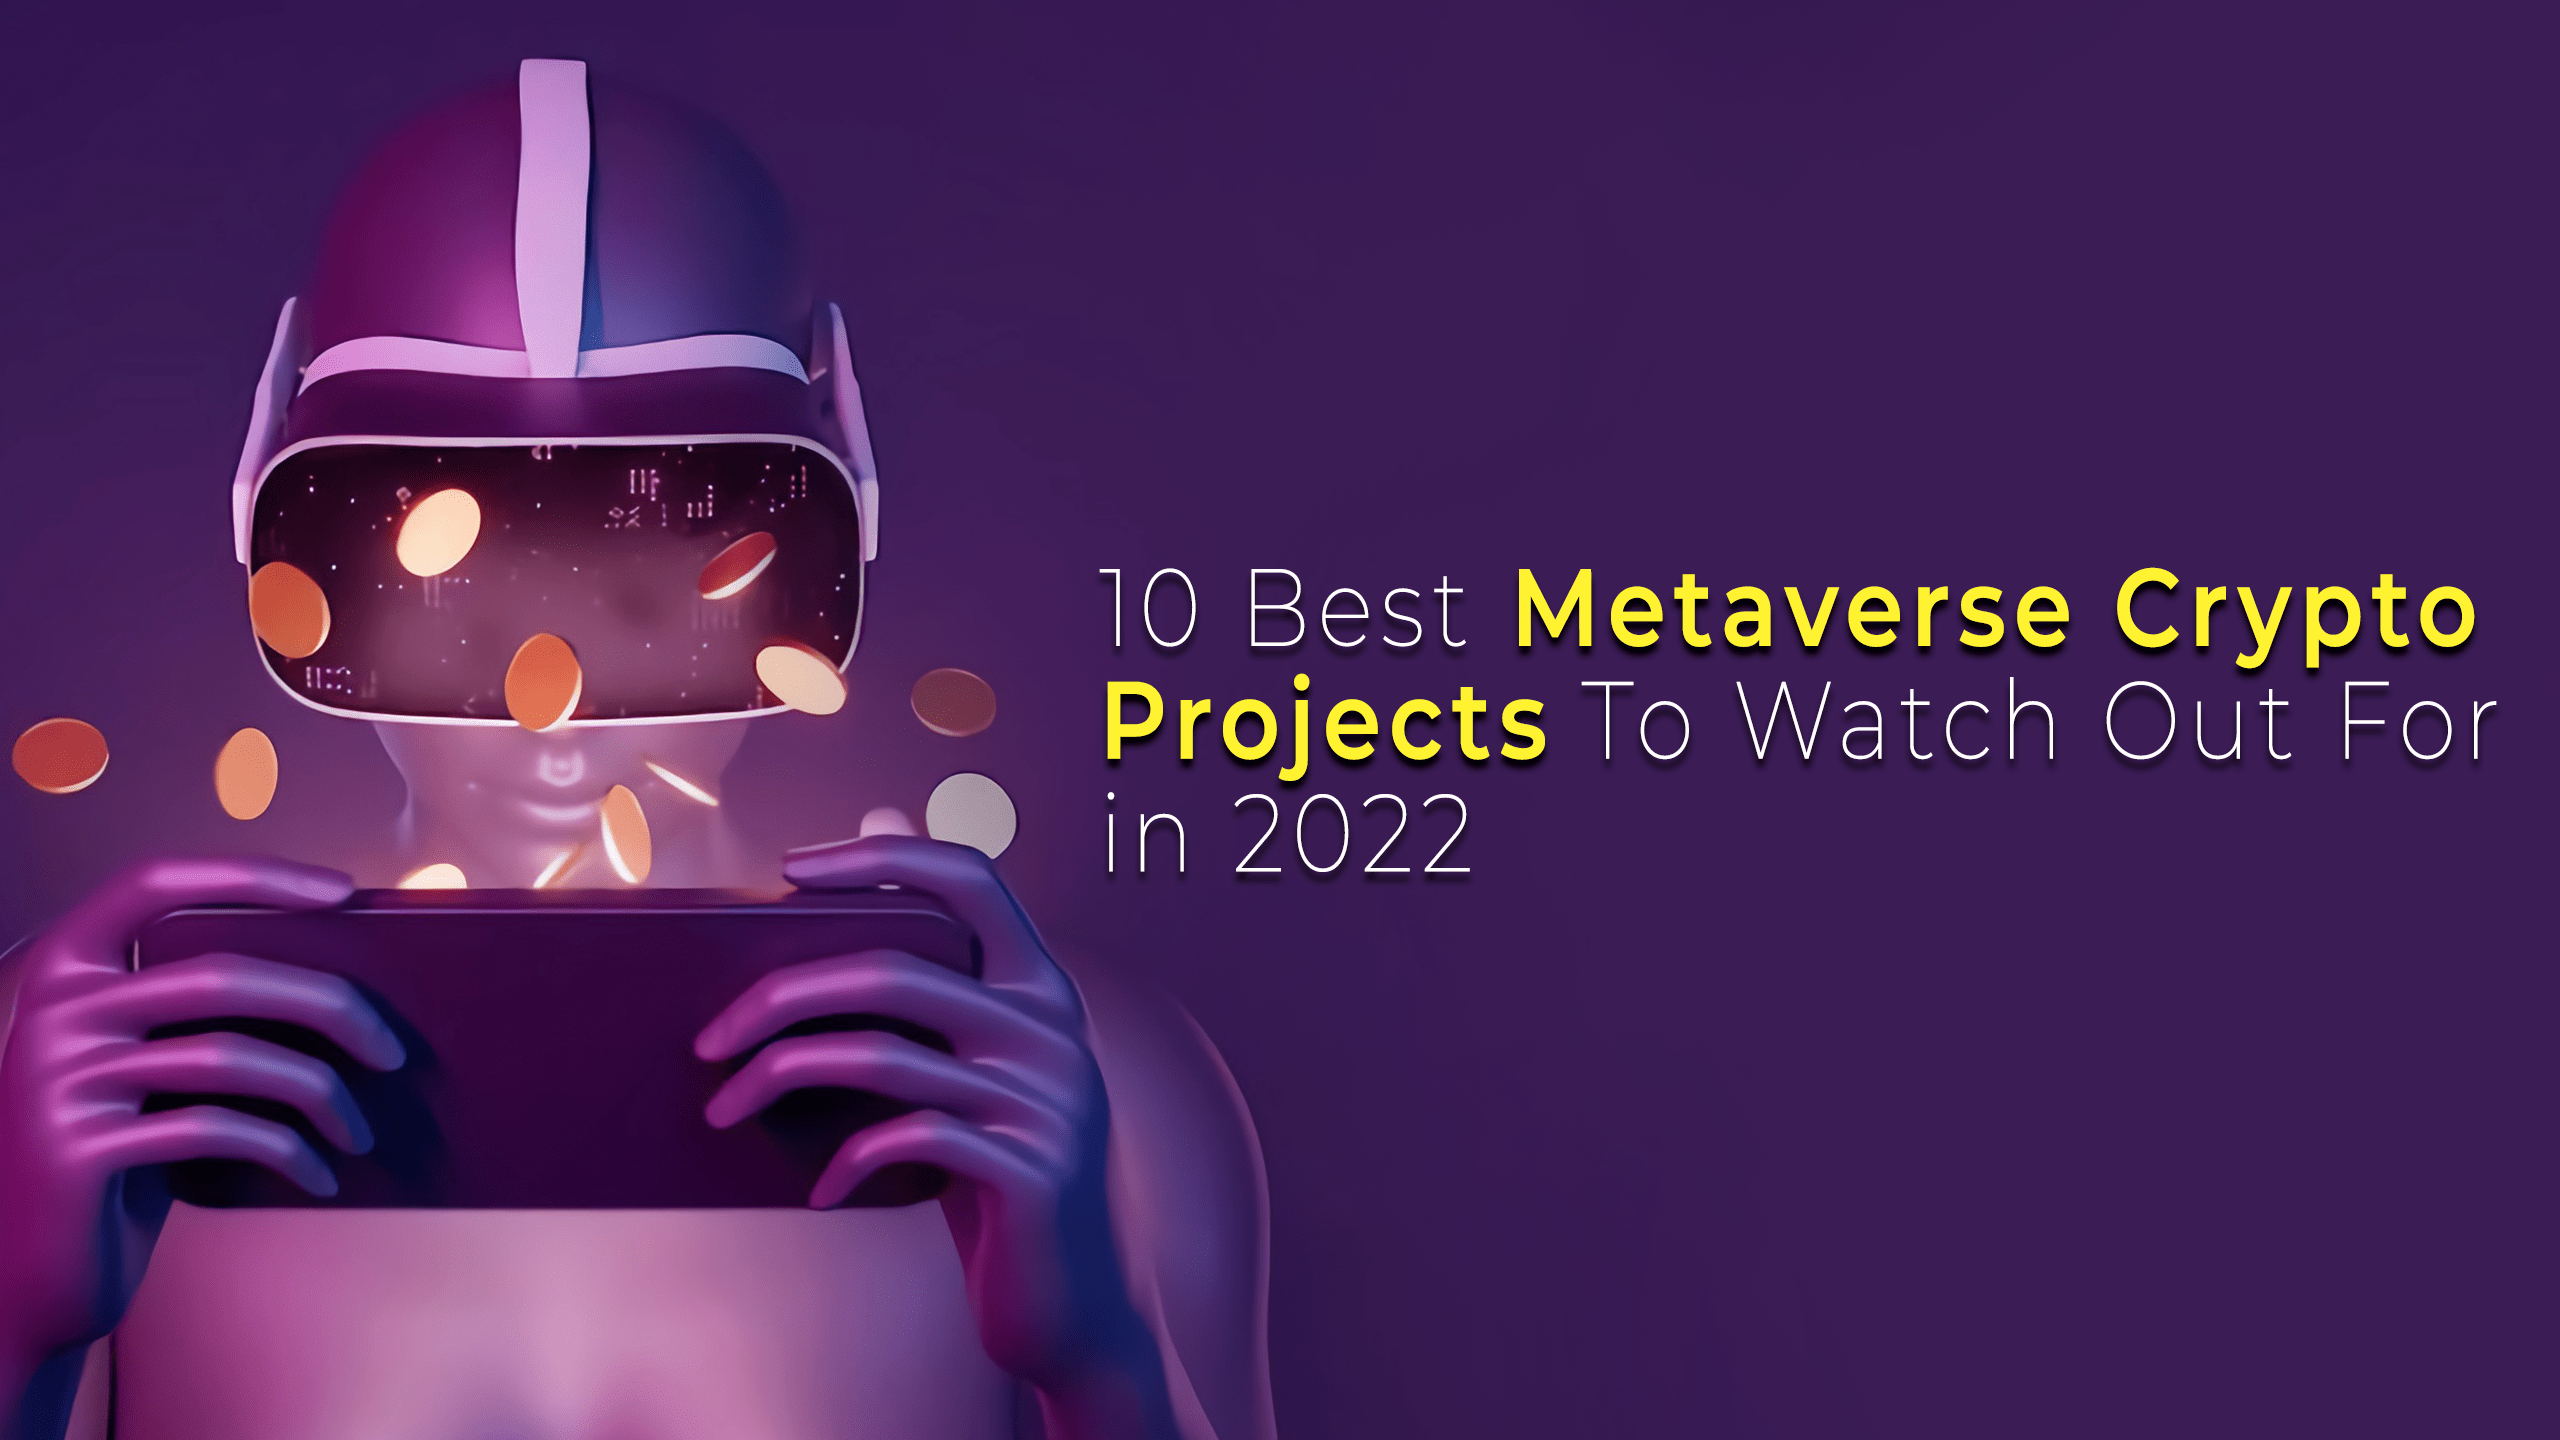 Metaverse Crypto Projects